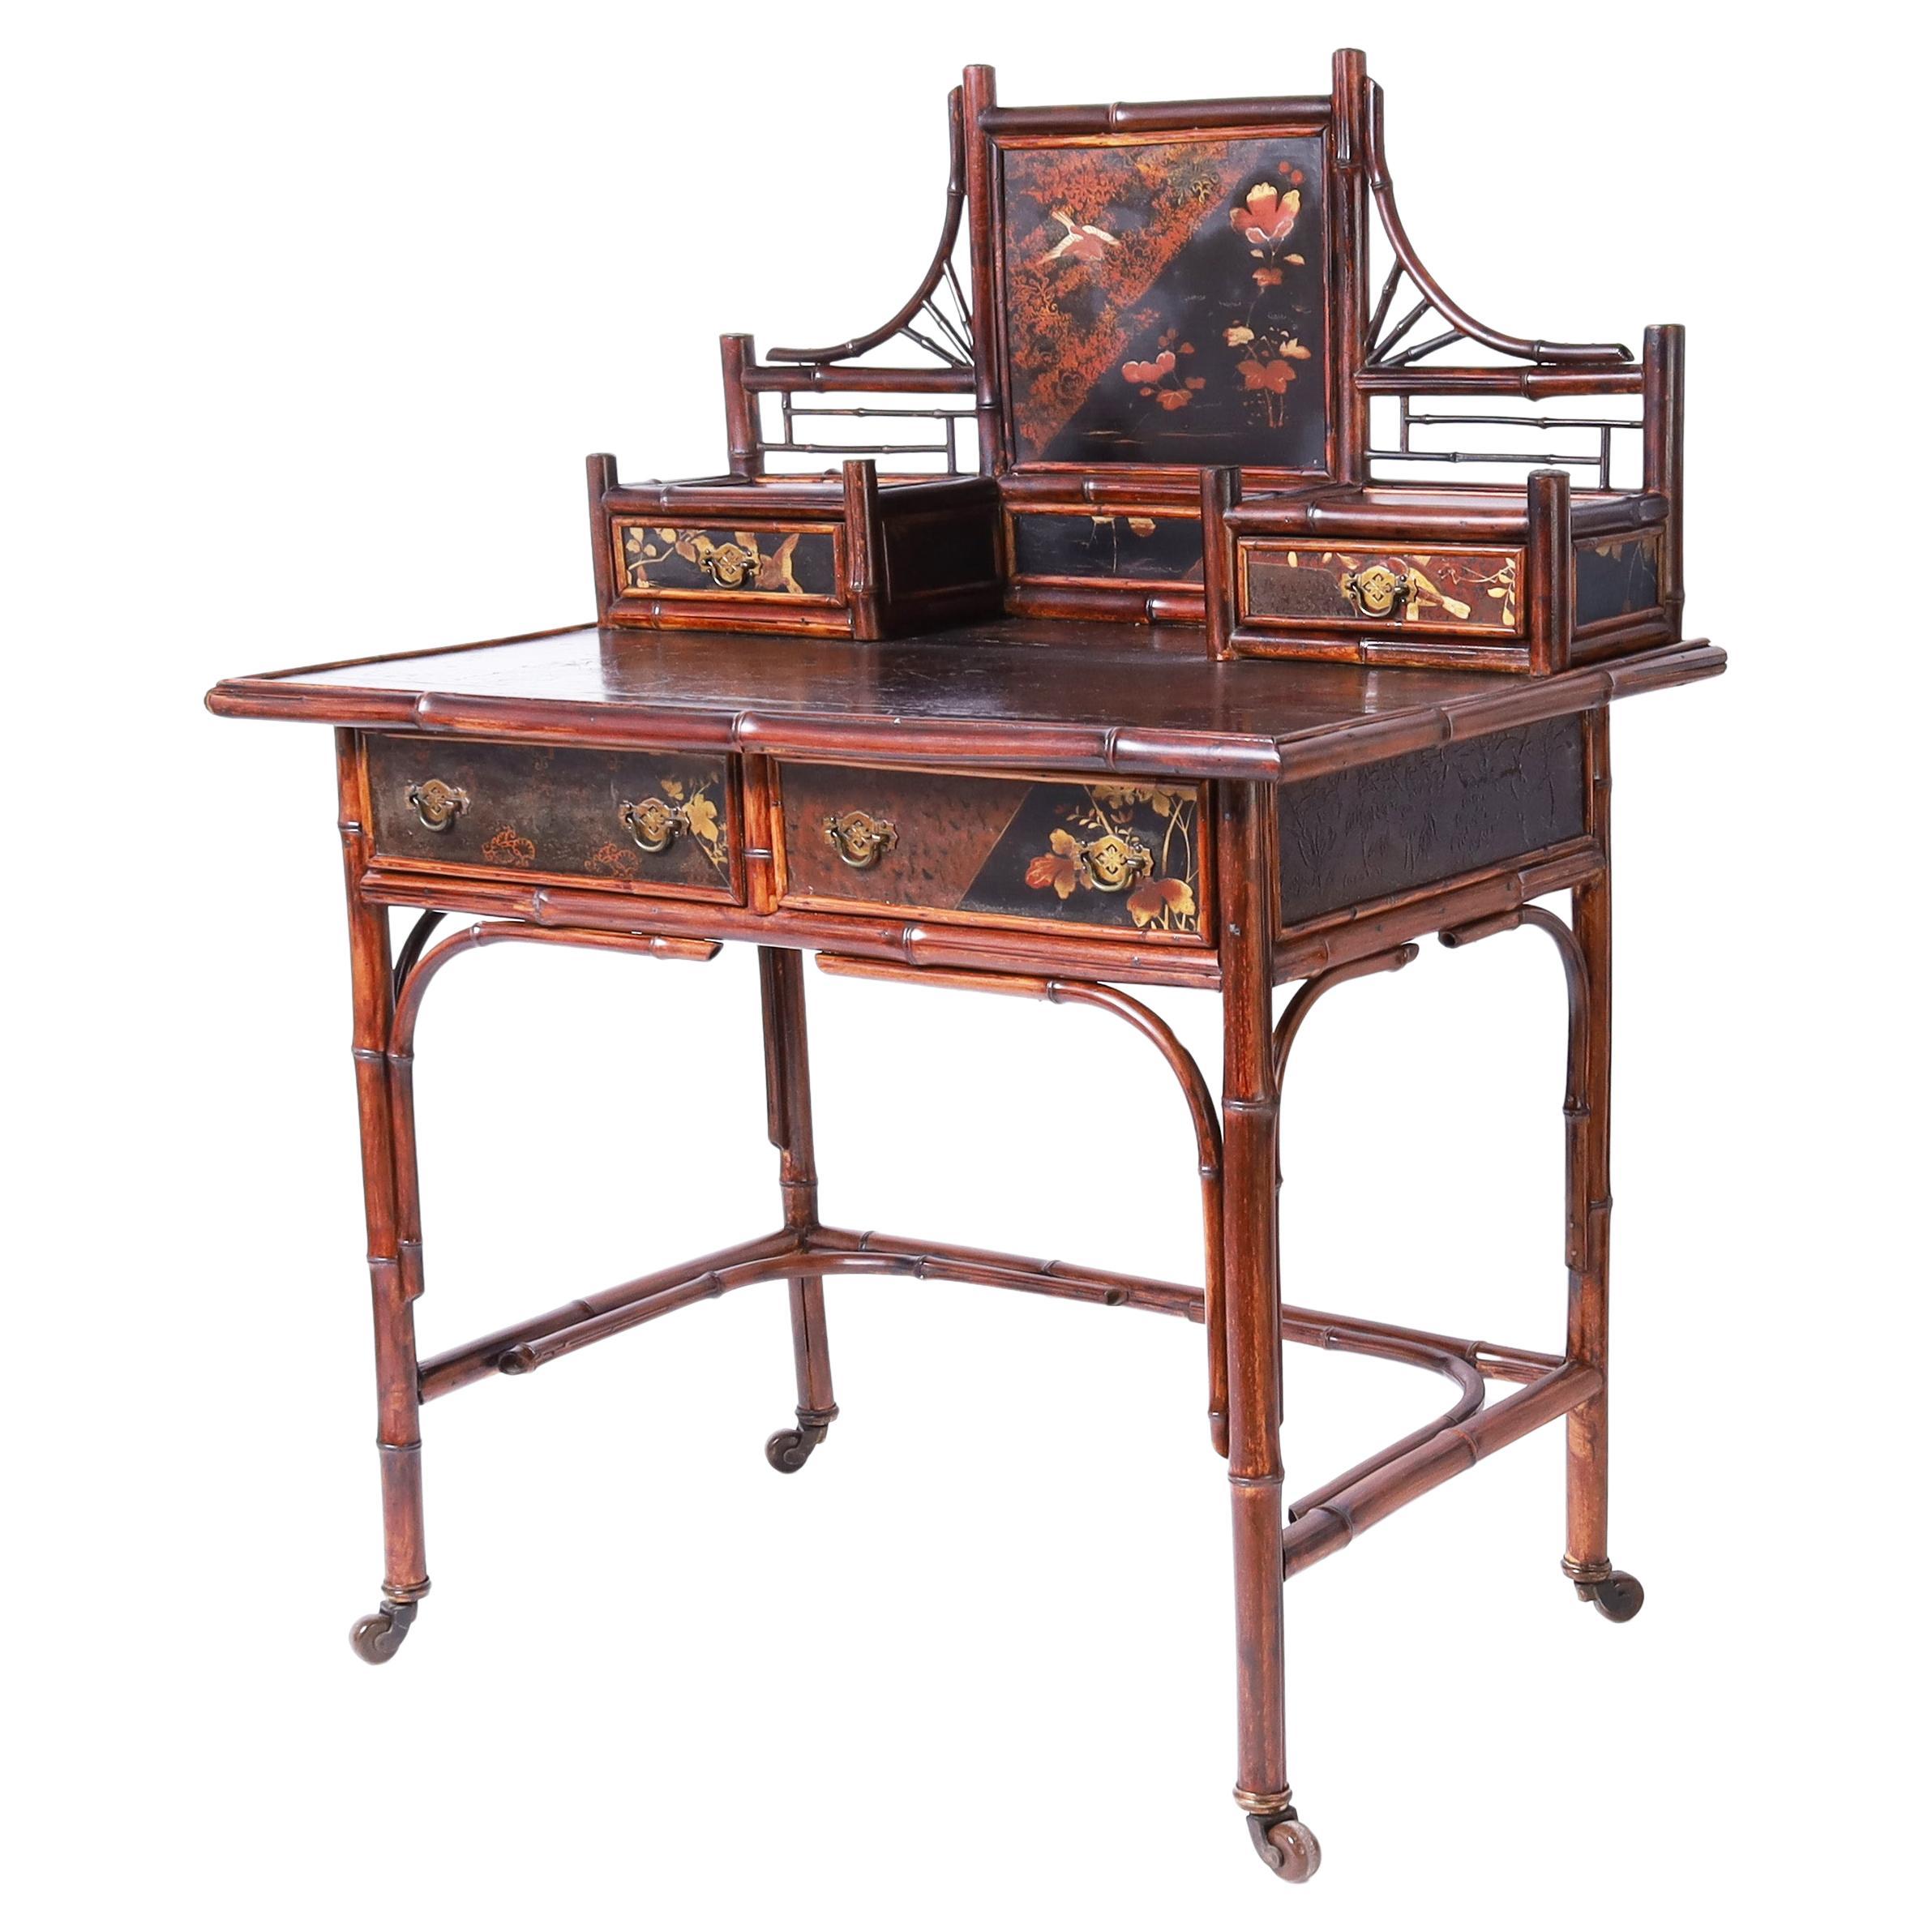 Antique English Aesthetics Movement Bamboo and Lacquer Desk For Sale